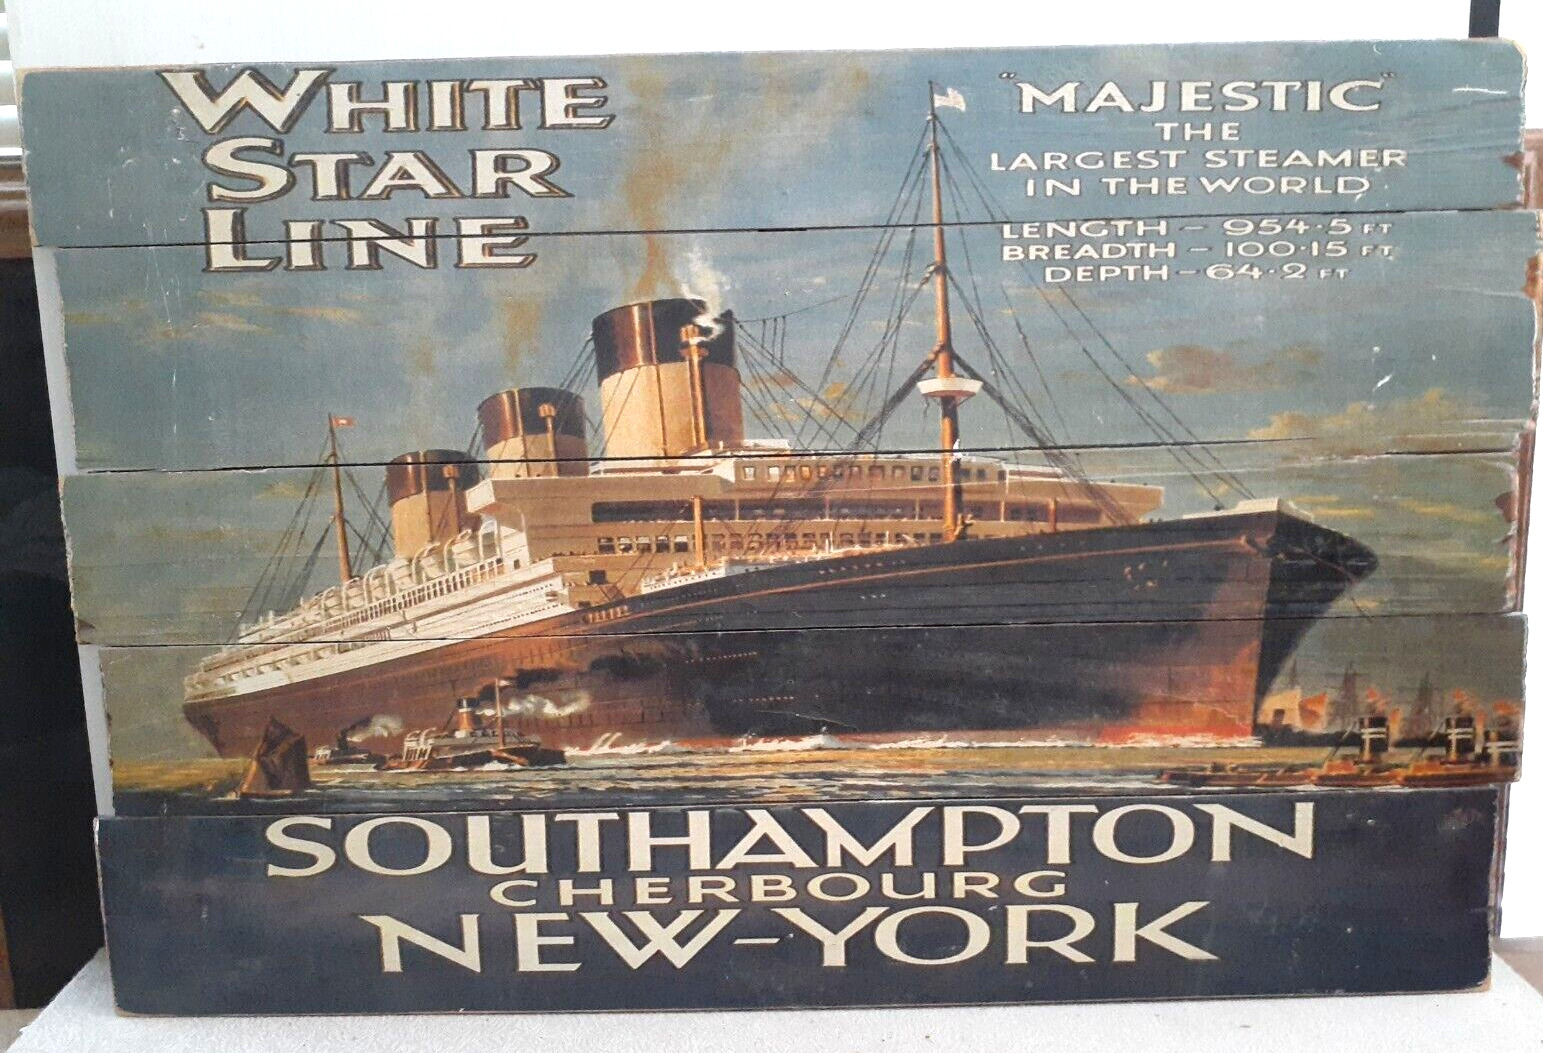 R. M. S. Majestic Steamer Largest in the World White Star Line Ship